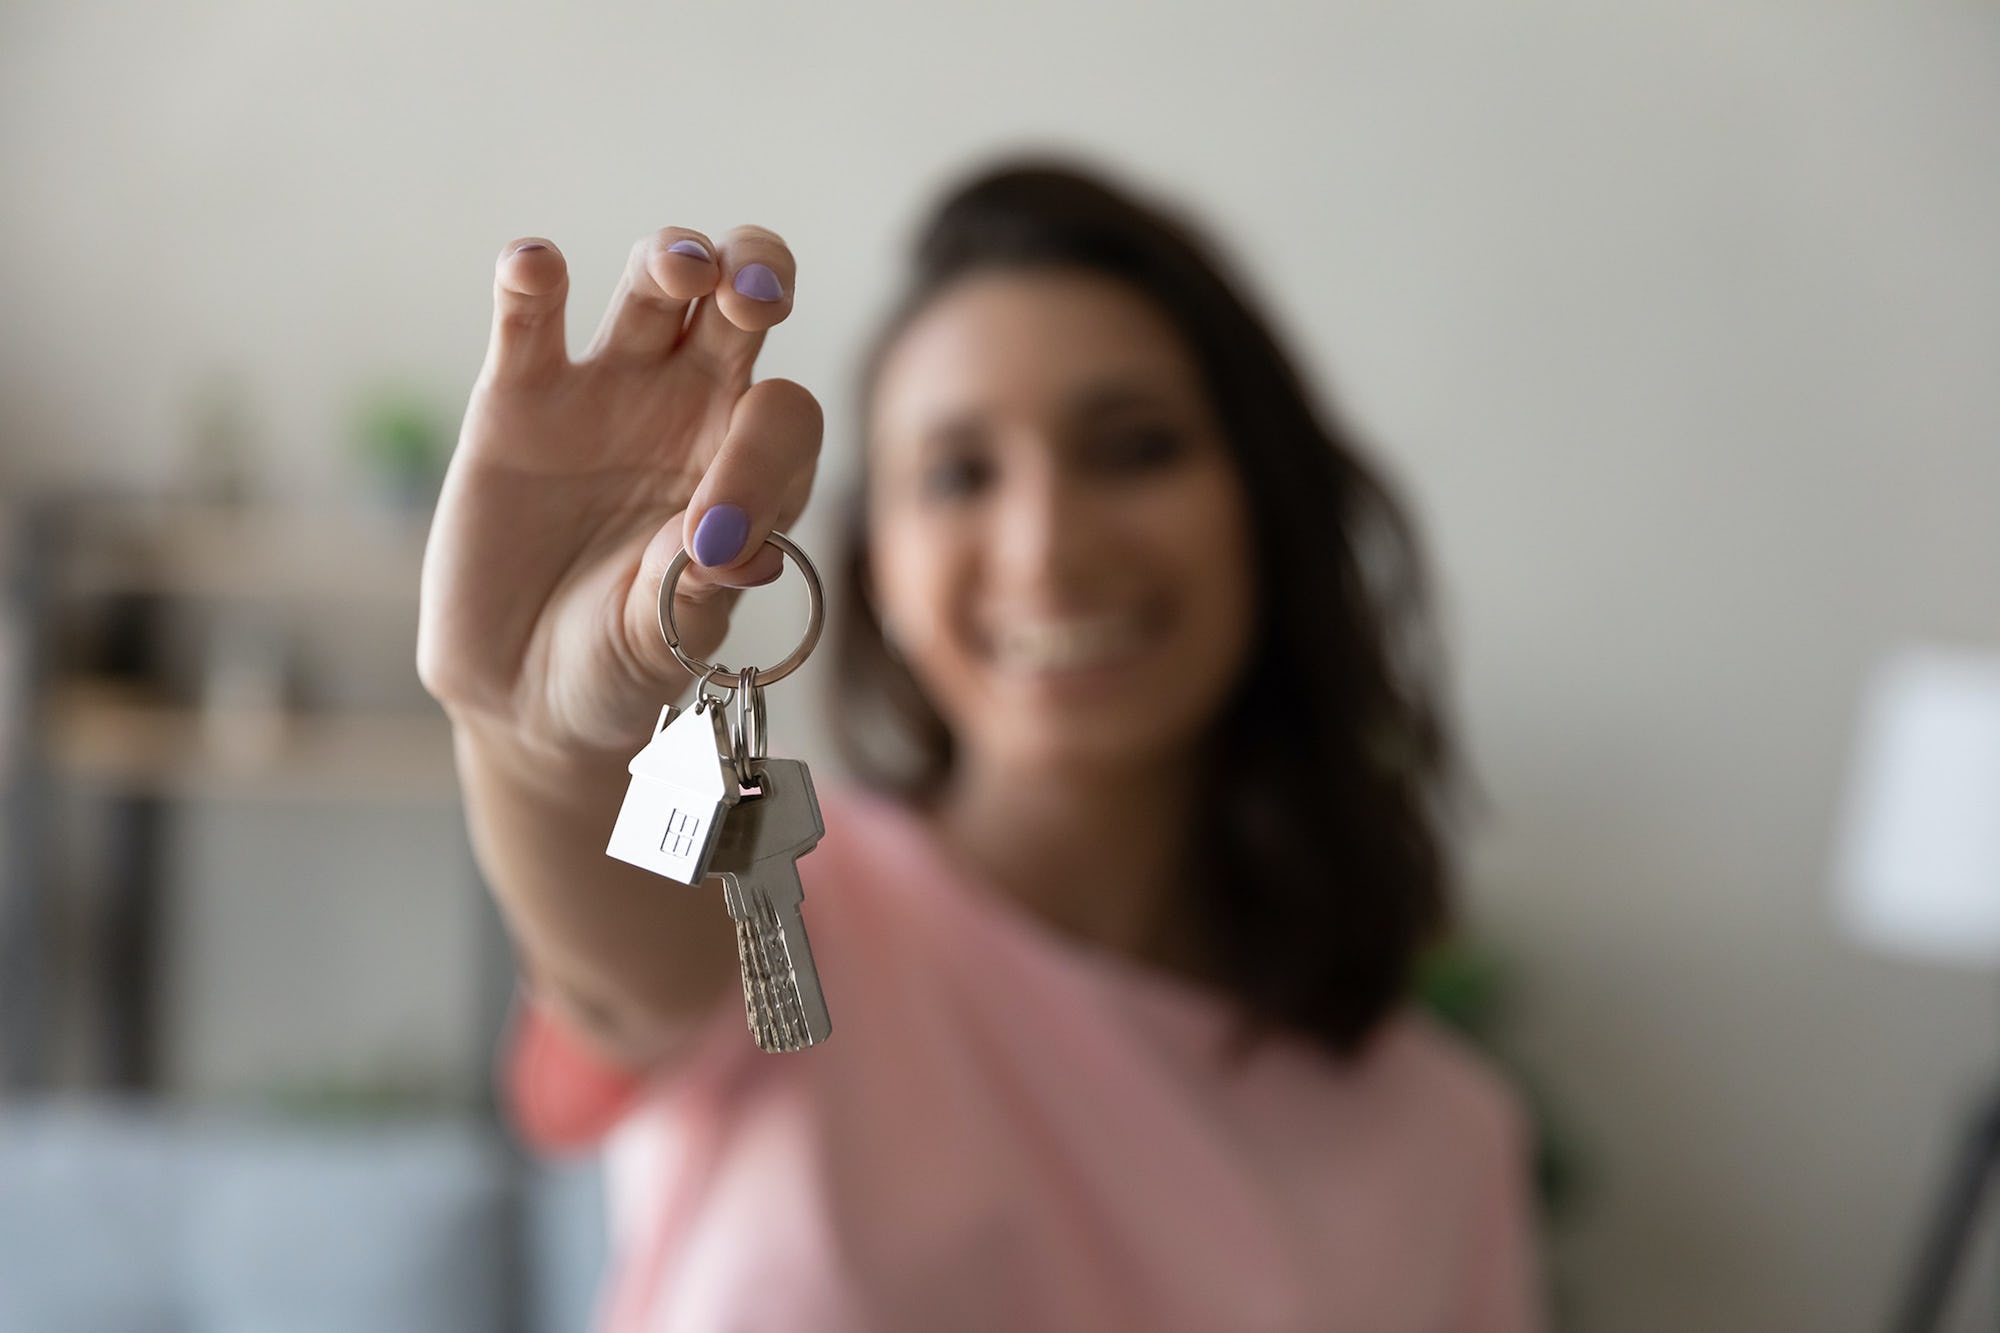 Woman holding keys to rental property and smiling, taking a human approach to renting out property